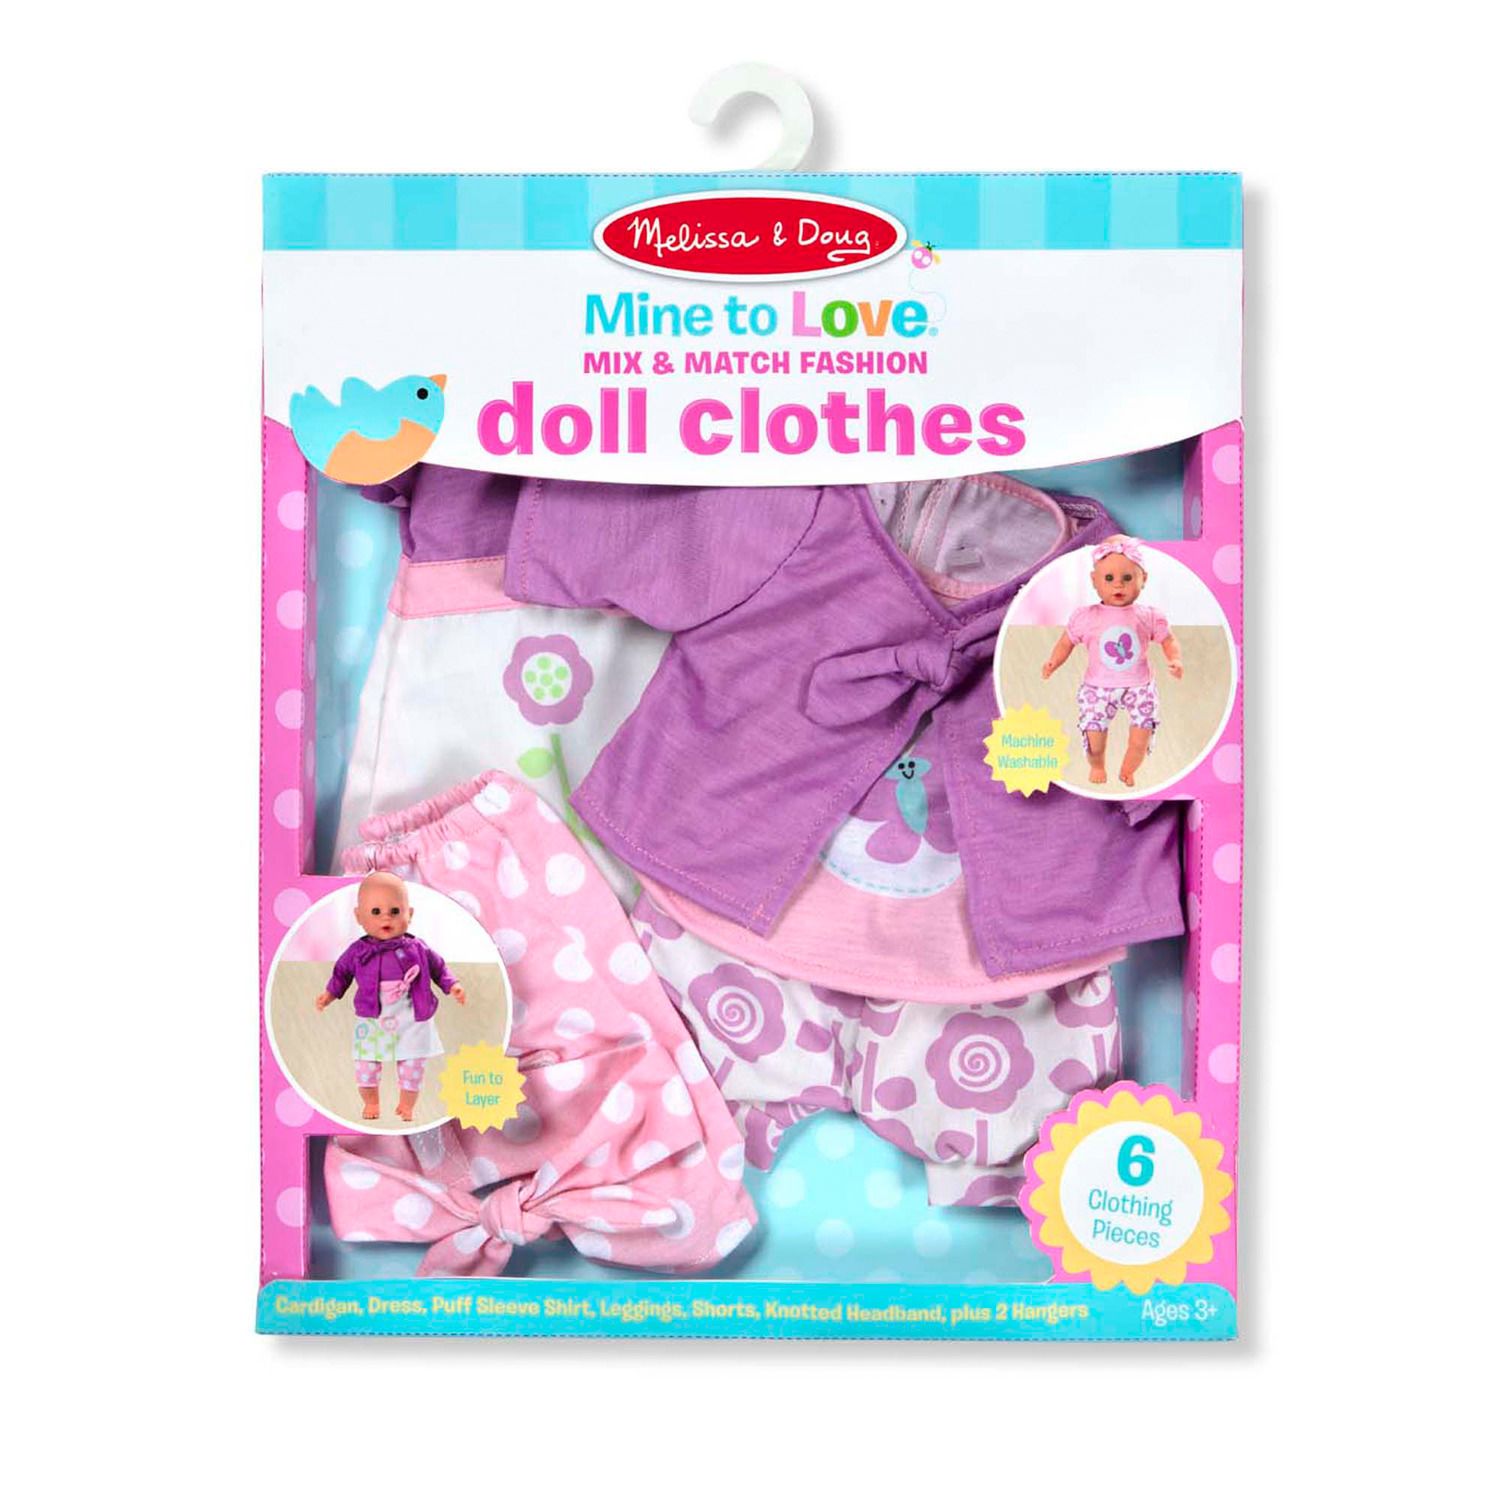 melissa and doug 14 inch doll clothes